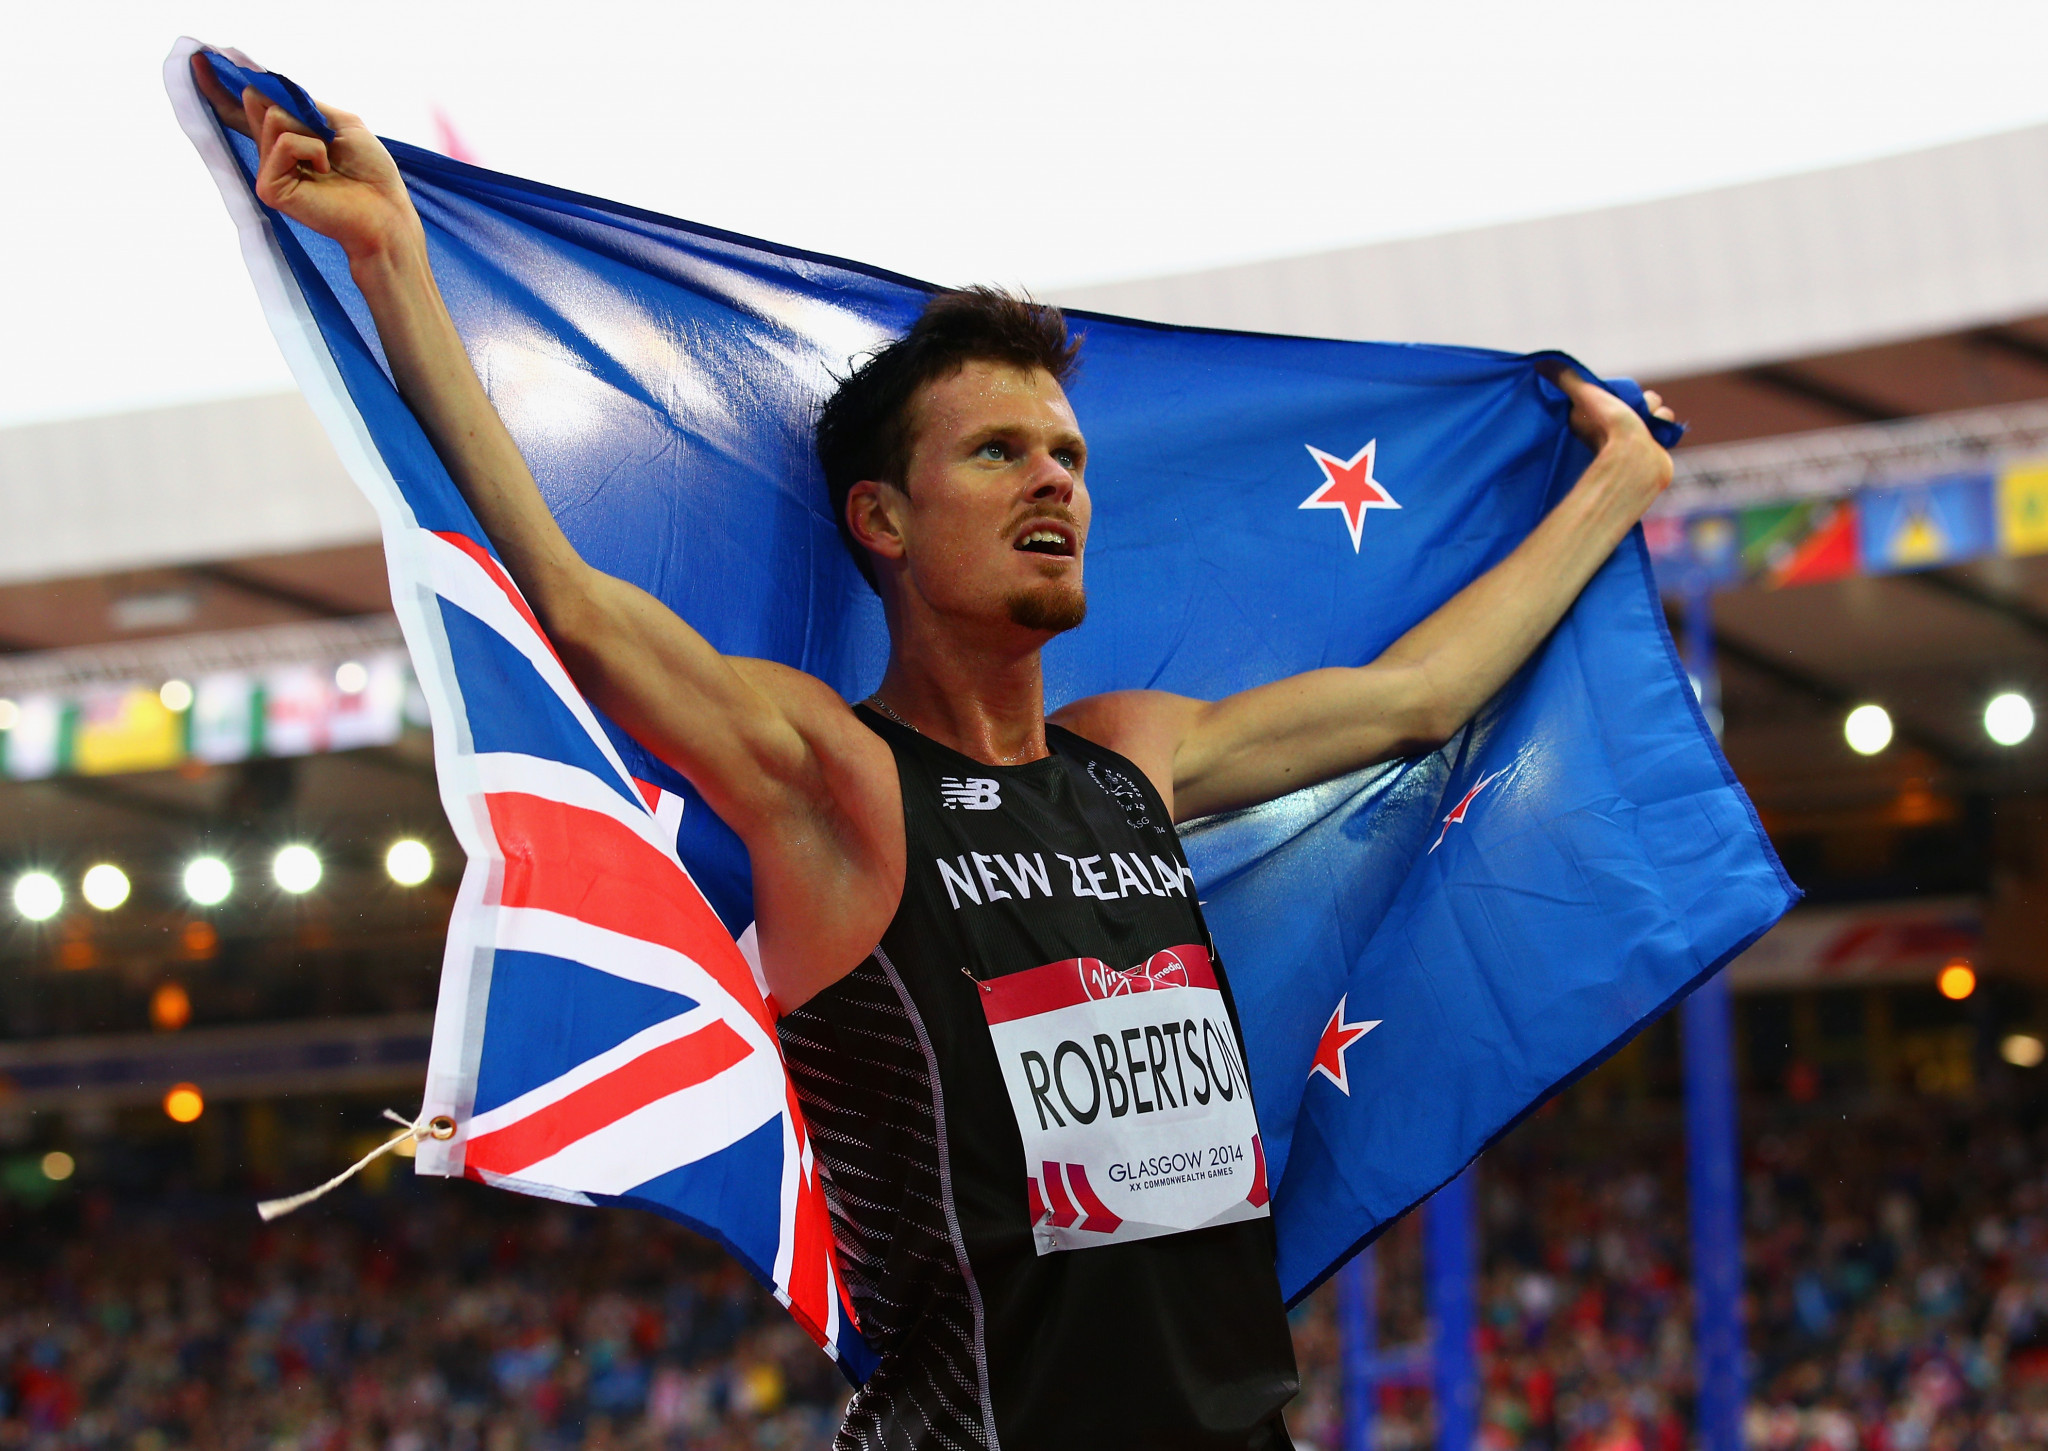 New Zealand's Commonwealth Games medallist Robertson arrested over sexual assault allegations 